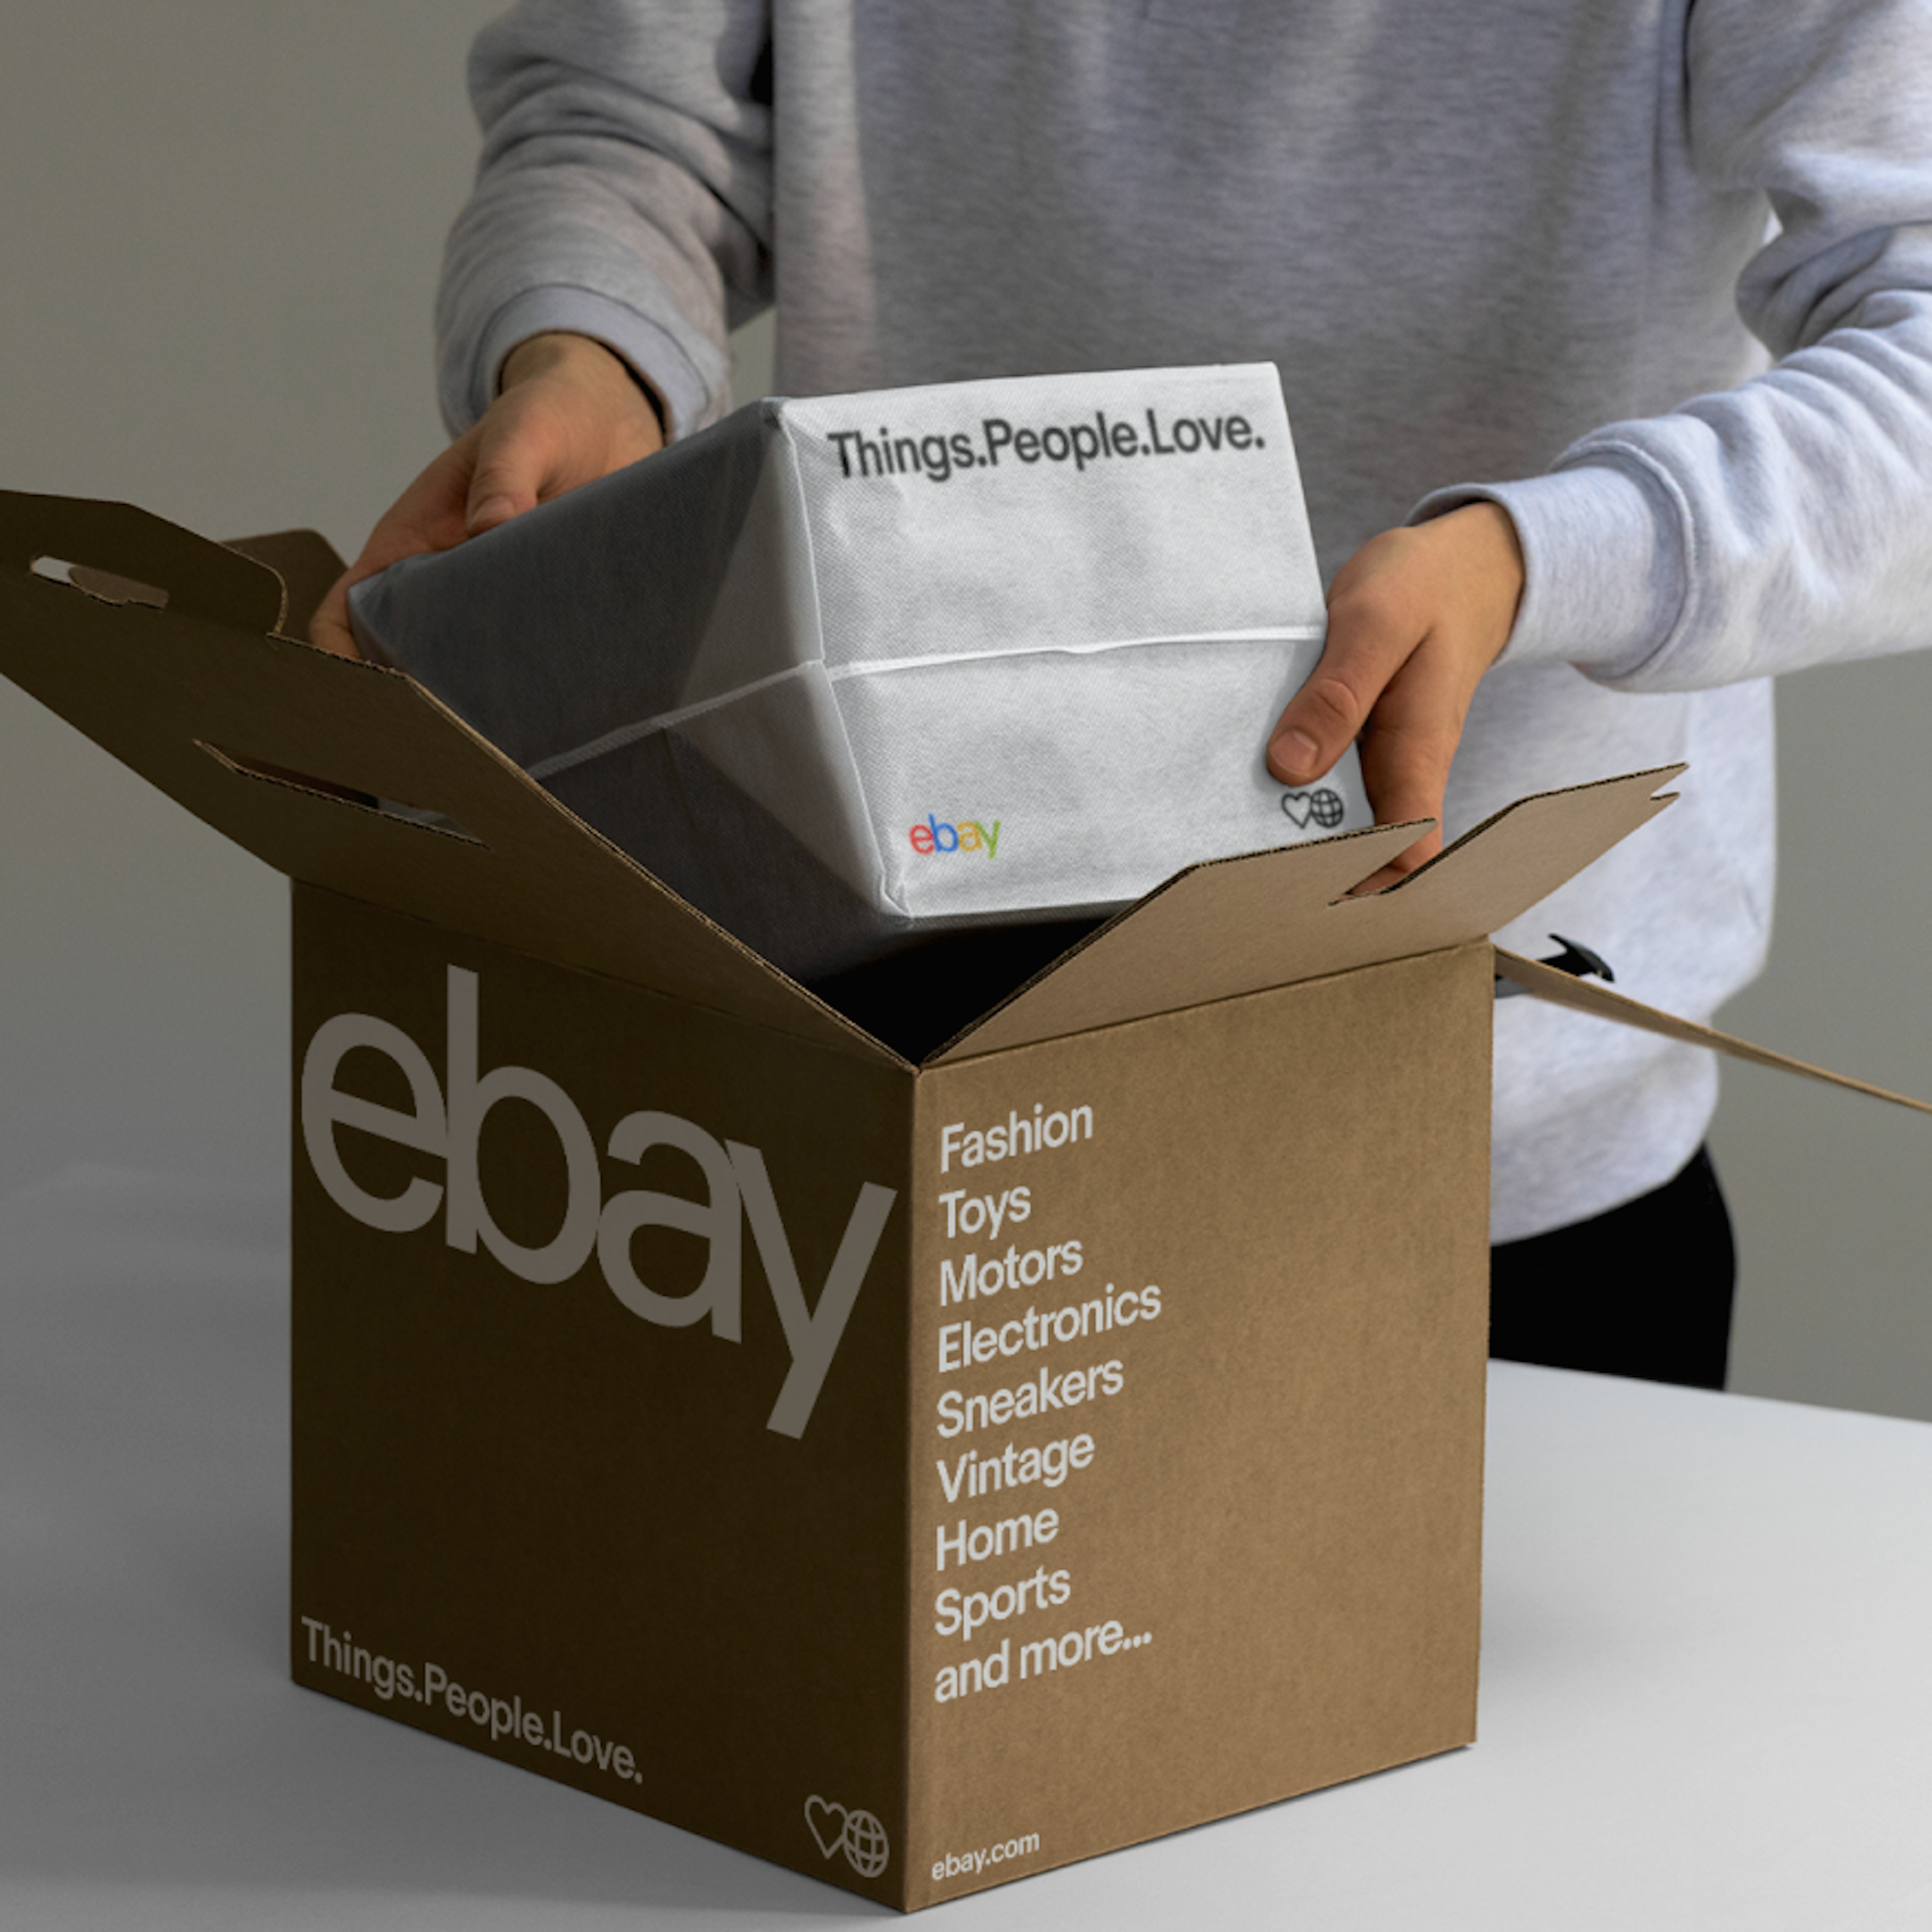 A large white logo and white text on a brown package.